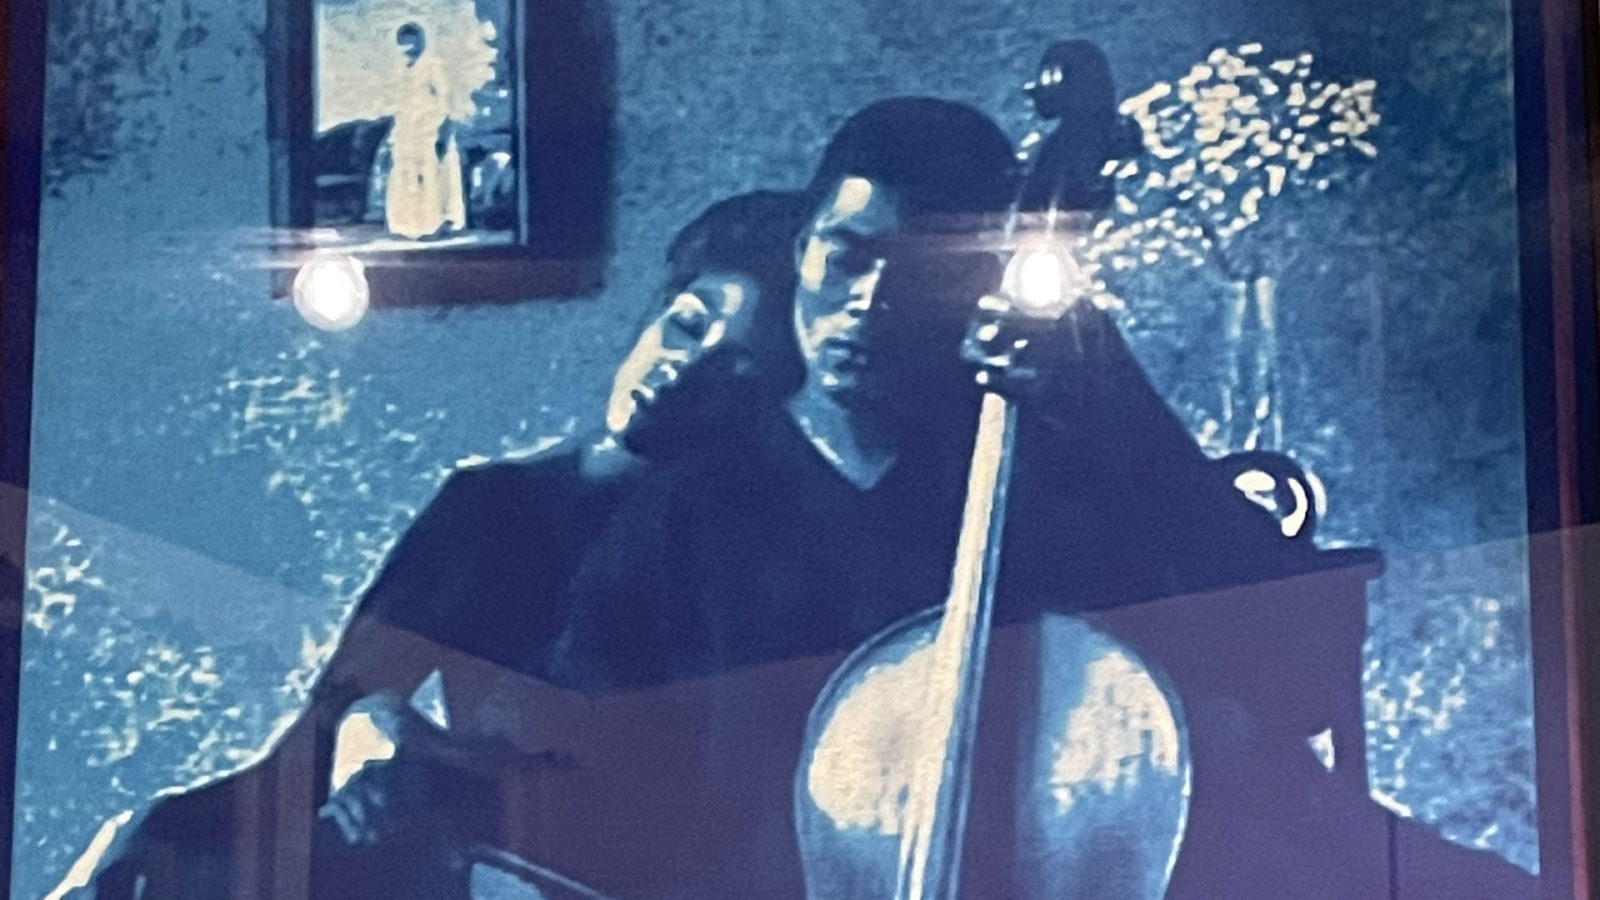 A Black man plays the cello softly as a woman leans on his shoulder at dusk, in a photograph in Lorenzo Baker's new work at MCLA. Press image courtesy of the artist